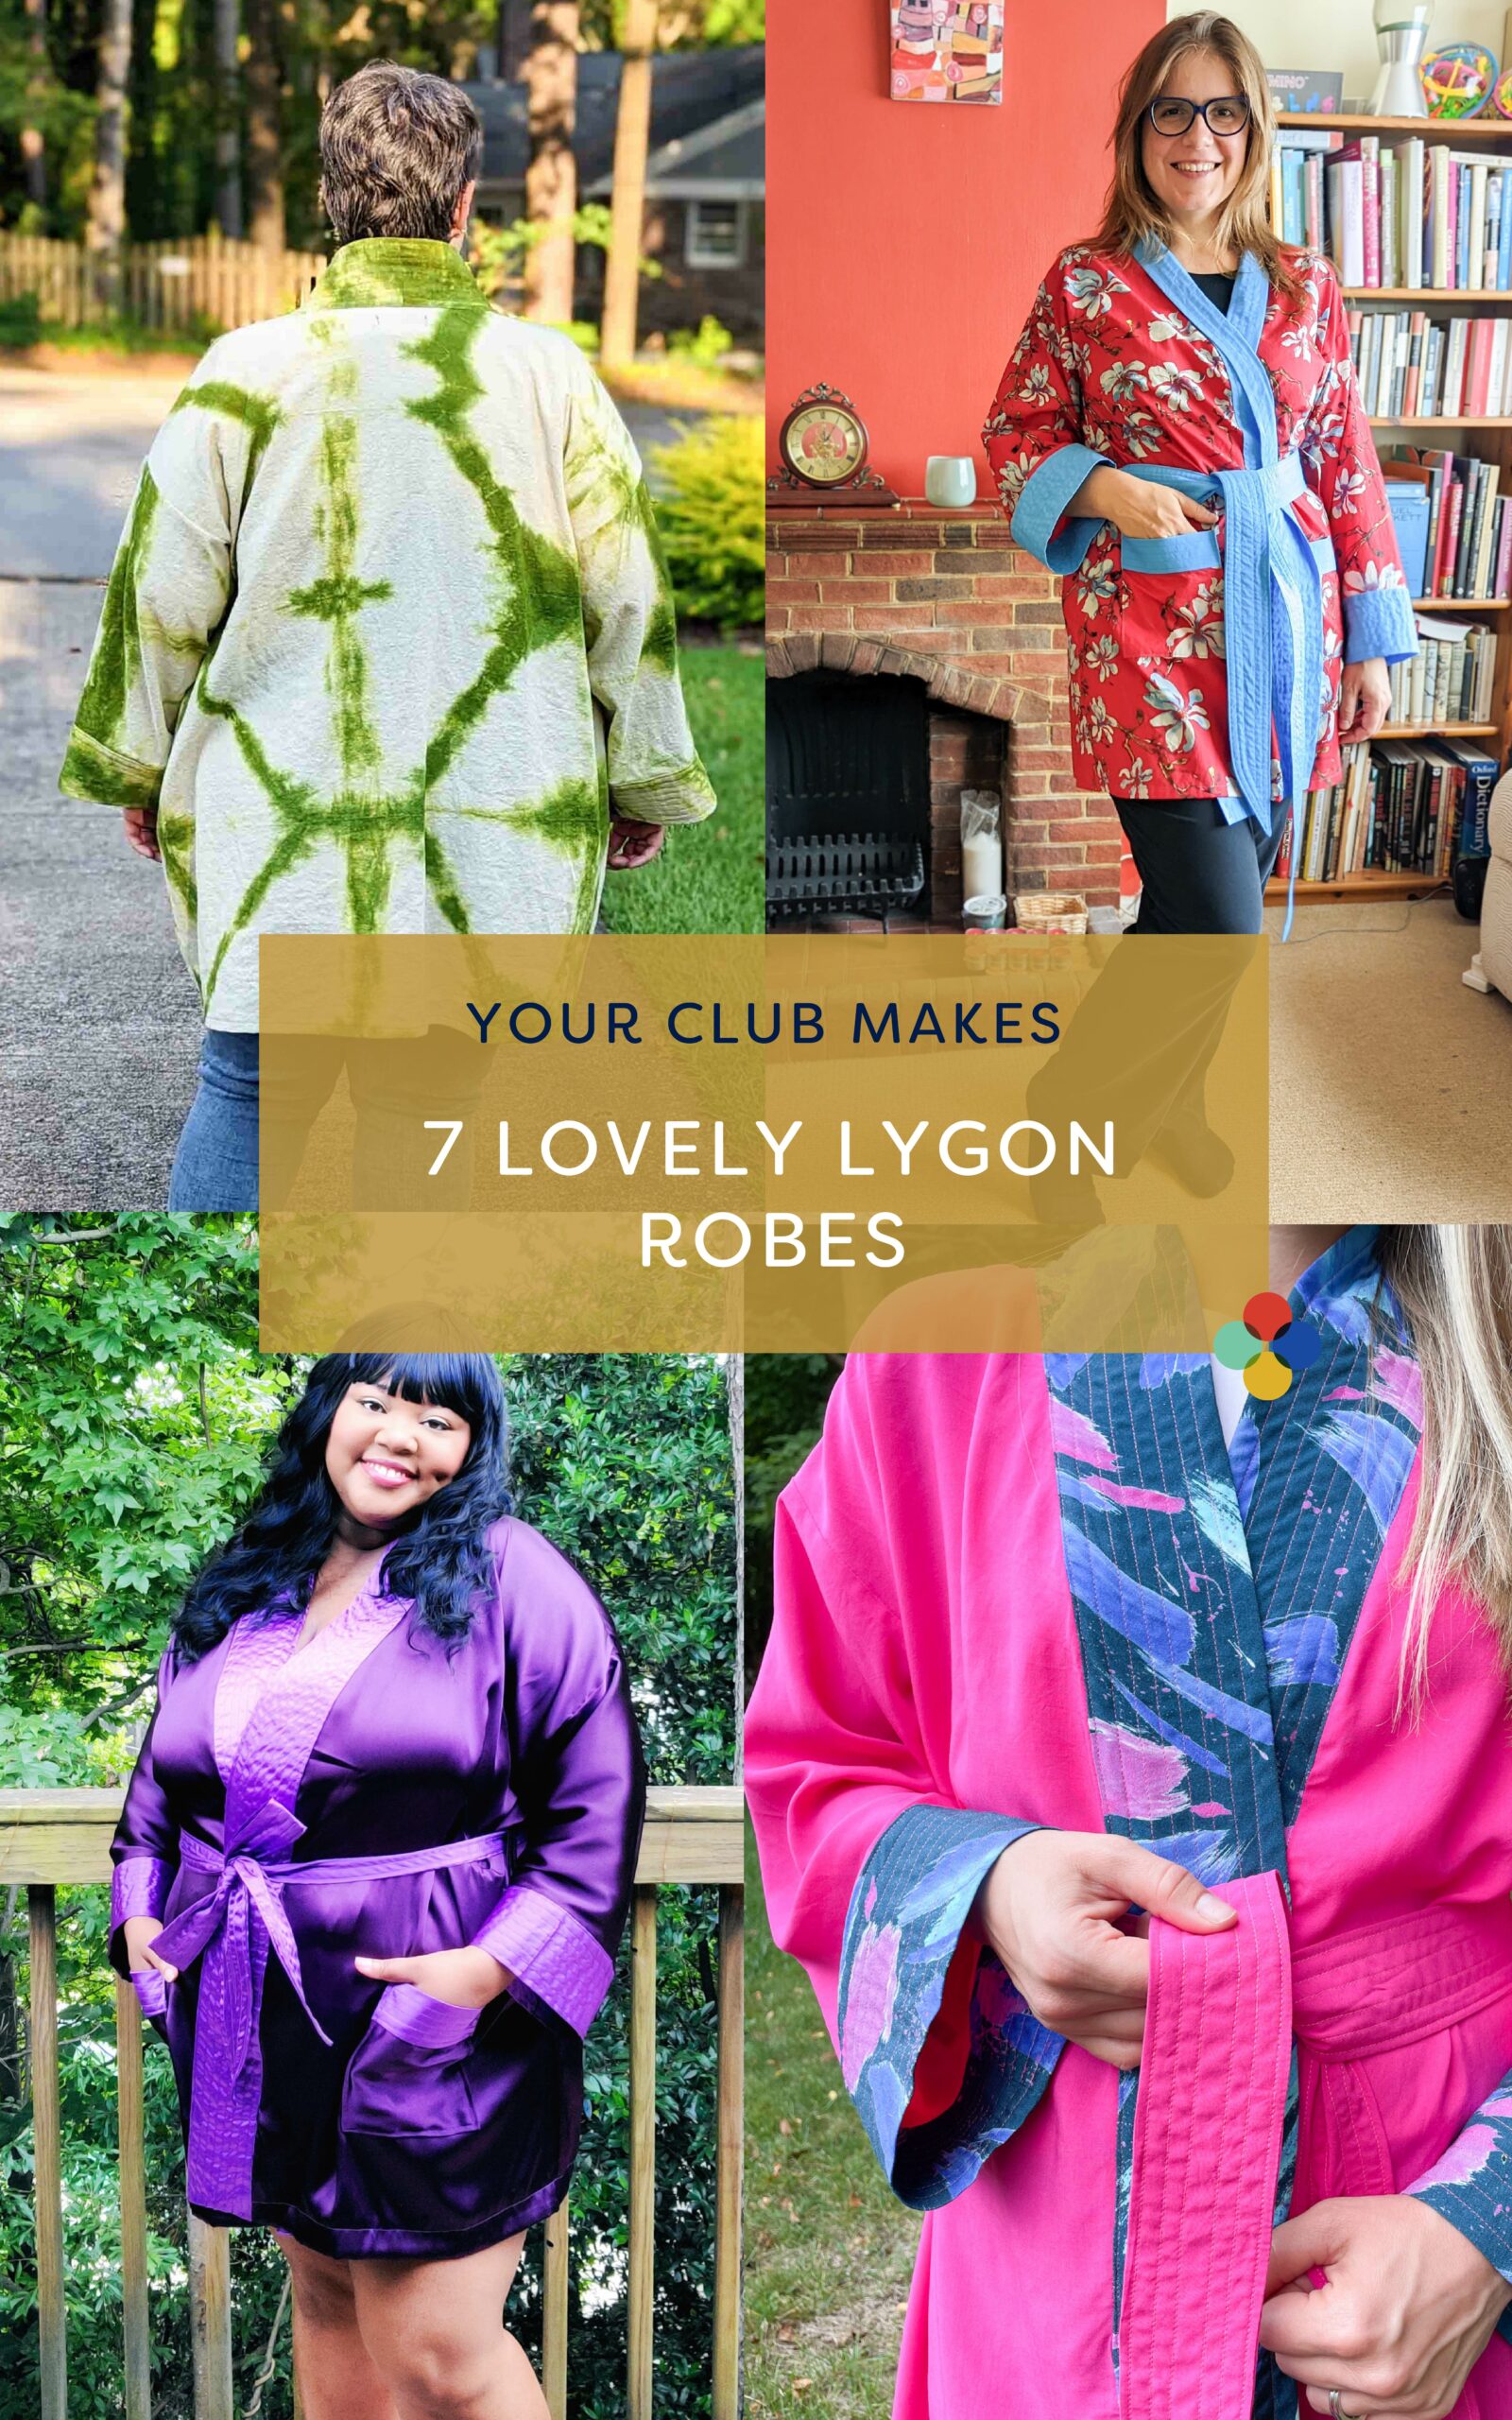 Your Club Makes: 7 Lovely Lygon Robes!